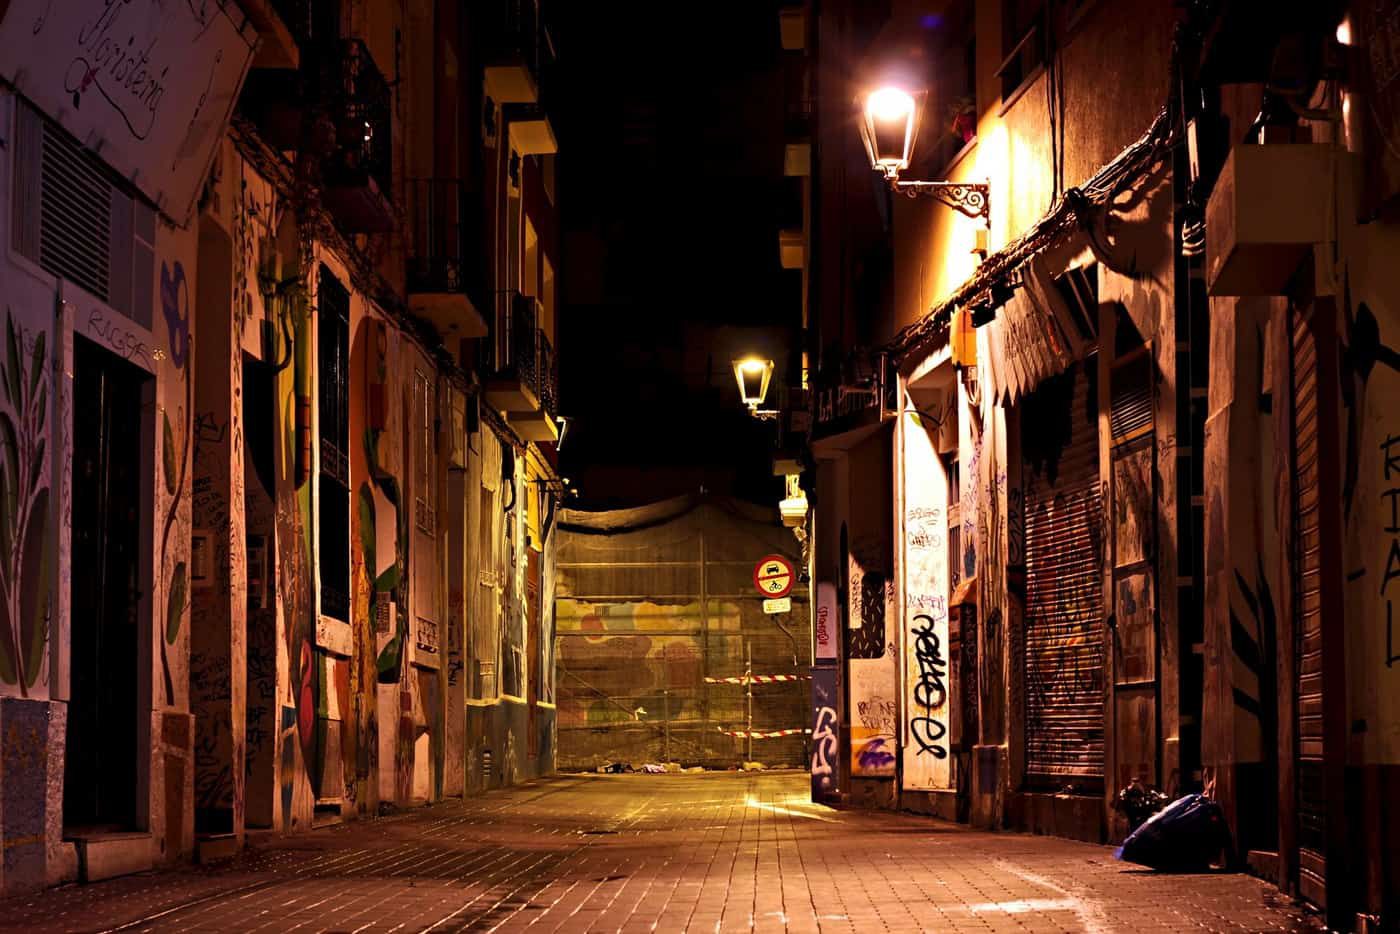 UNFAMILIAR ALLEYS: Finding novelty near your home